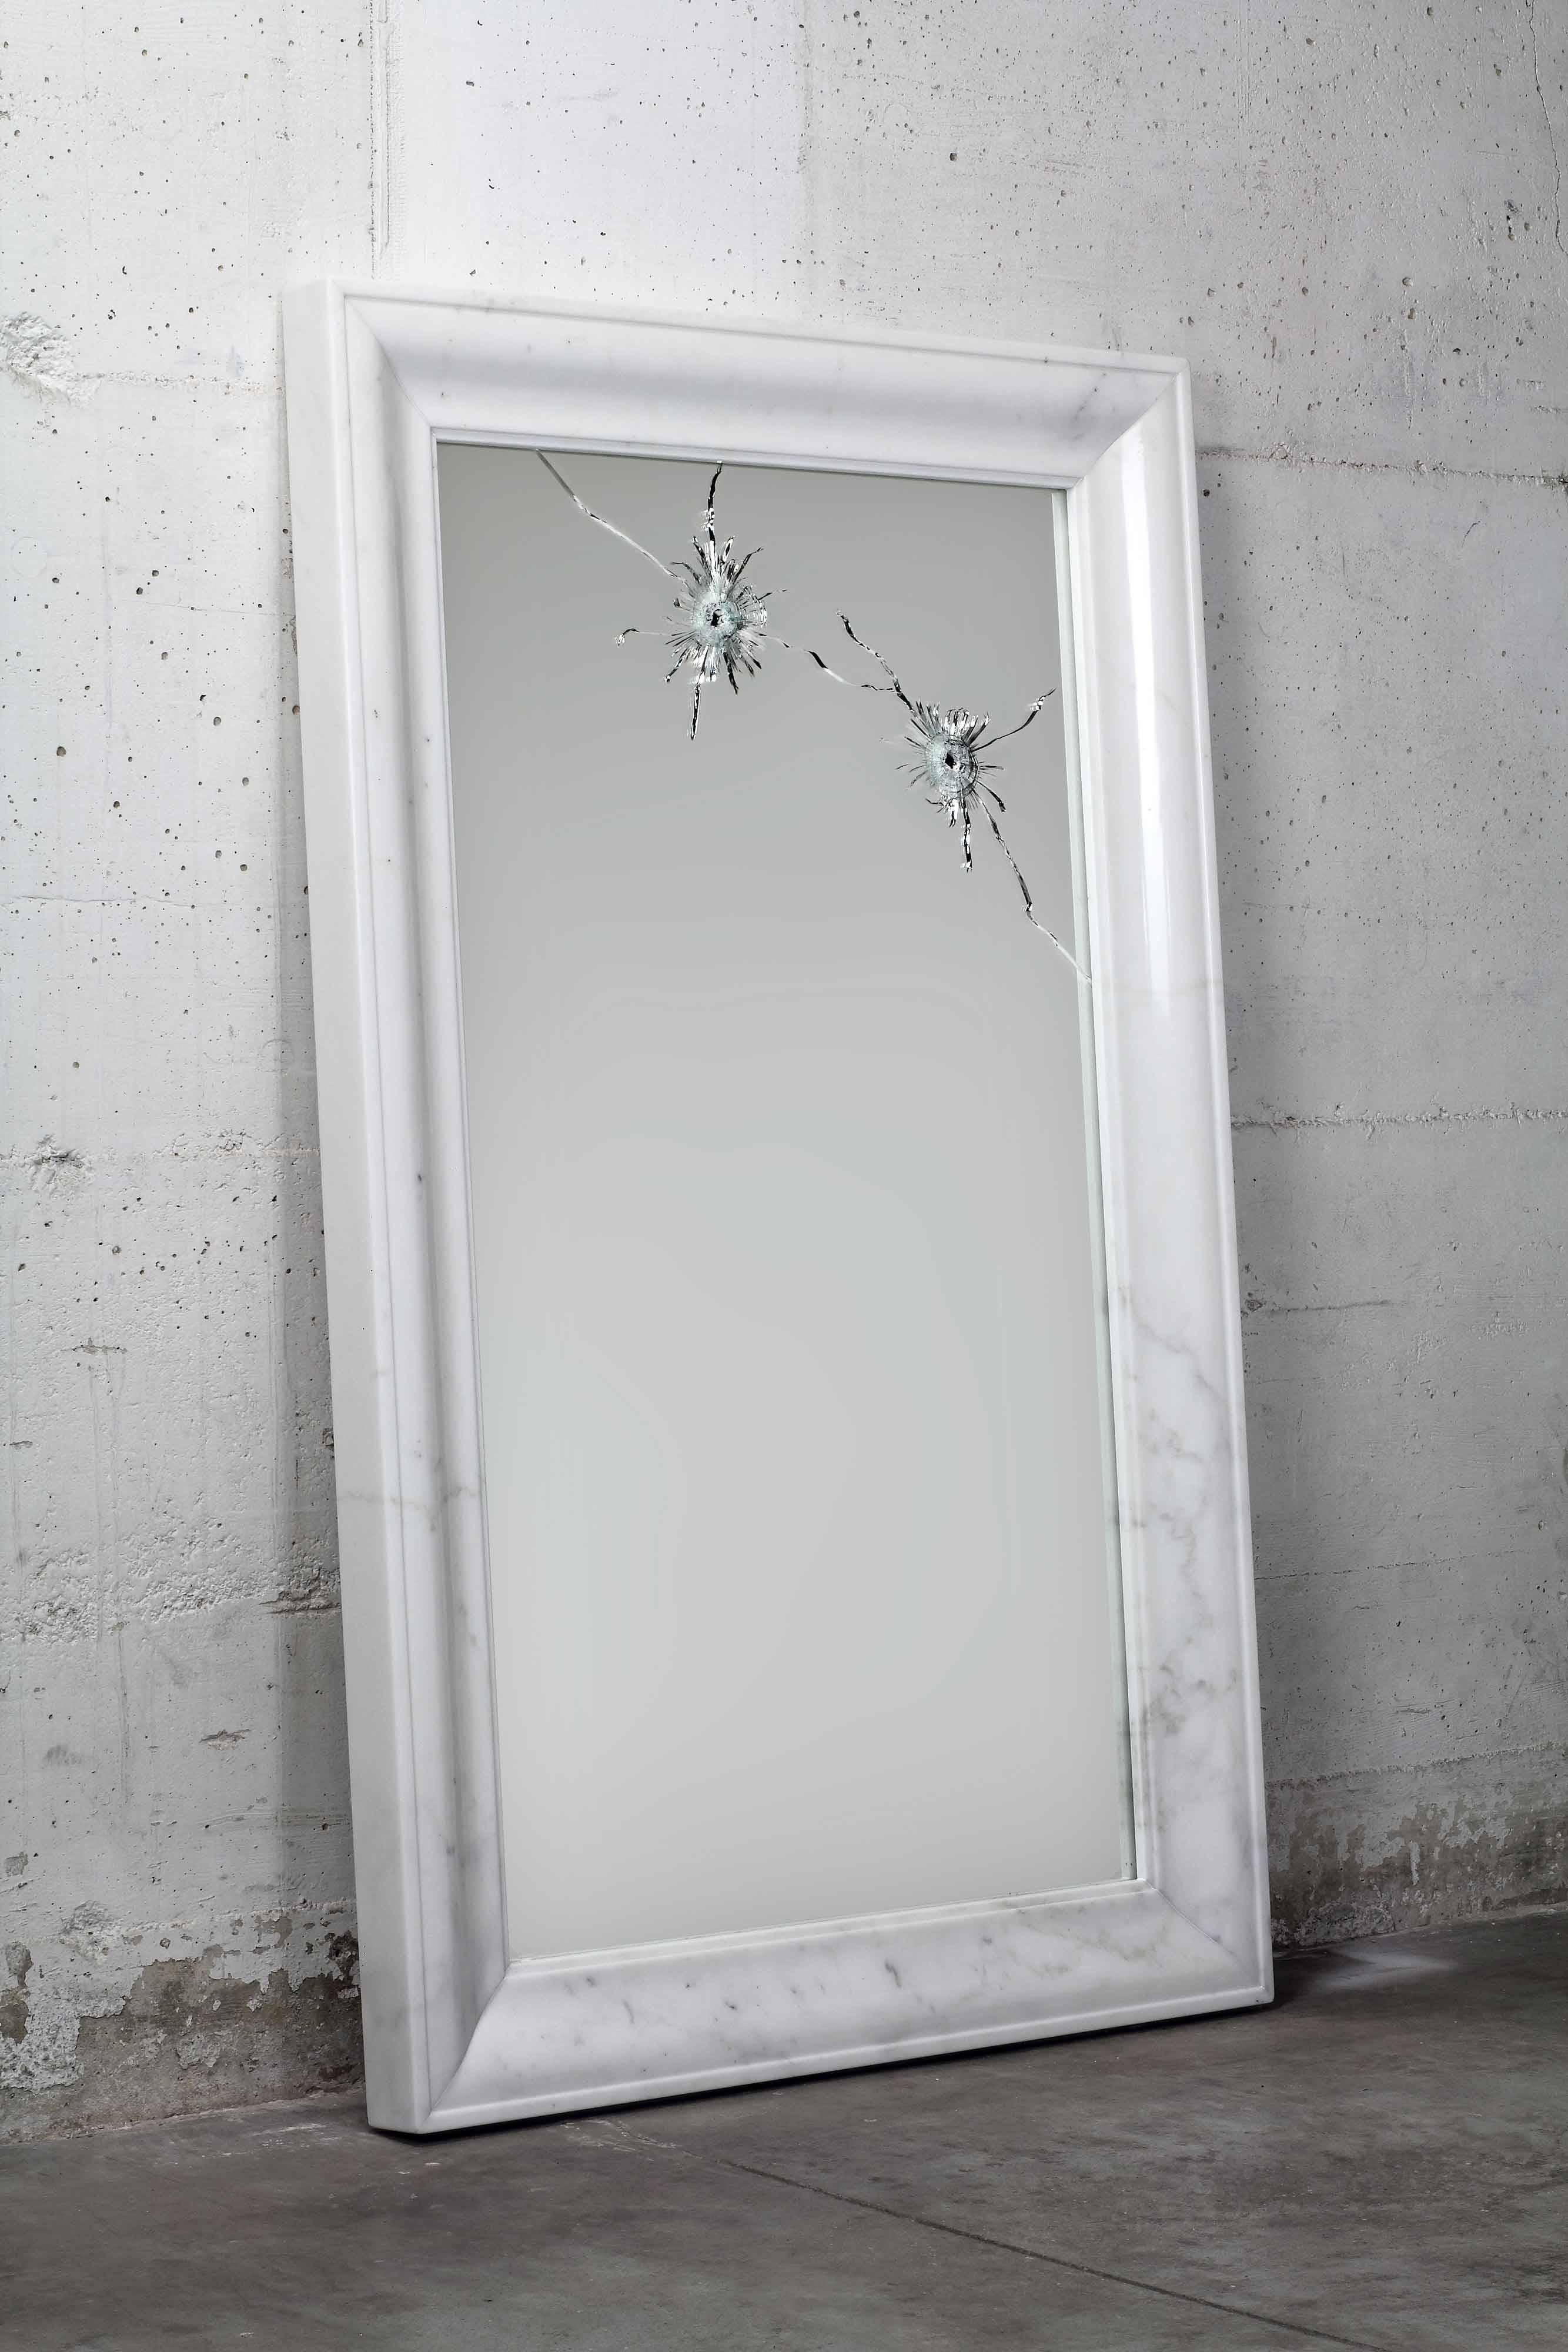 The 'Seven Years' wall mirror is made of security-glass, mirror hit by gunshots and frame in polished Statuary marble (origin: Tuscany). 

Mirror dimension: H 120 x W 75 cm. Dimensions are customizable.

Limited Edition of 15.

Each mirror is hand